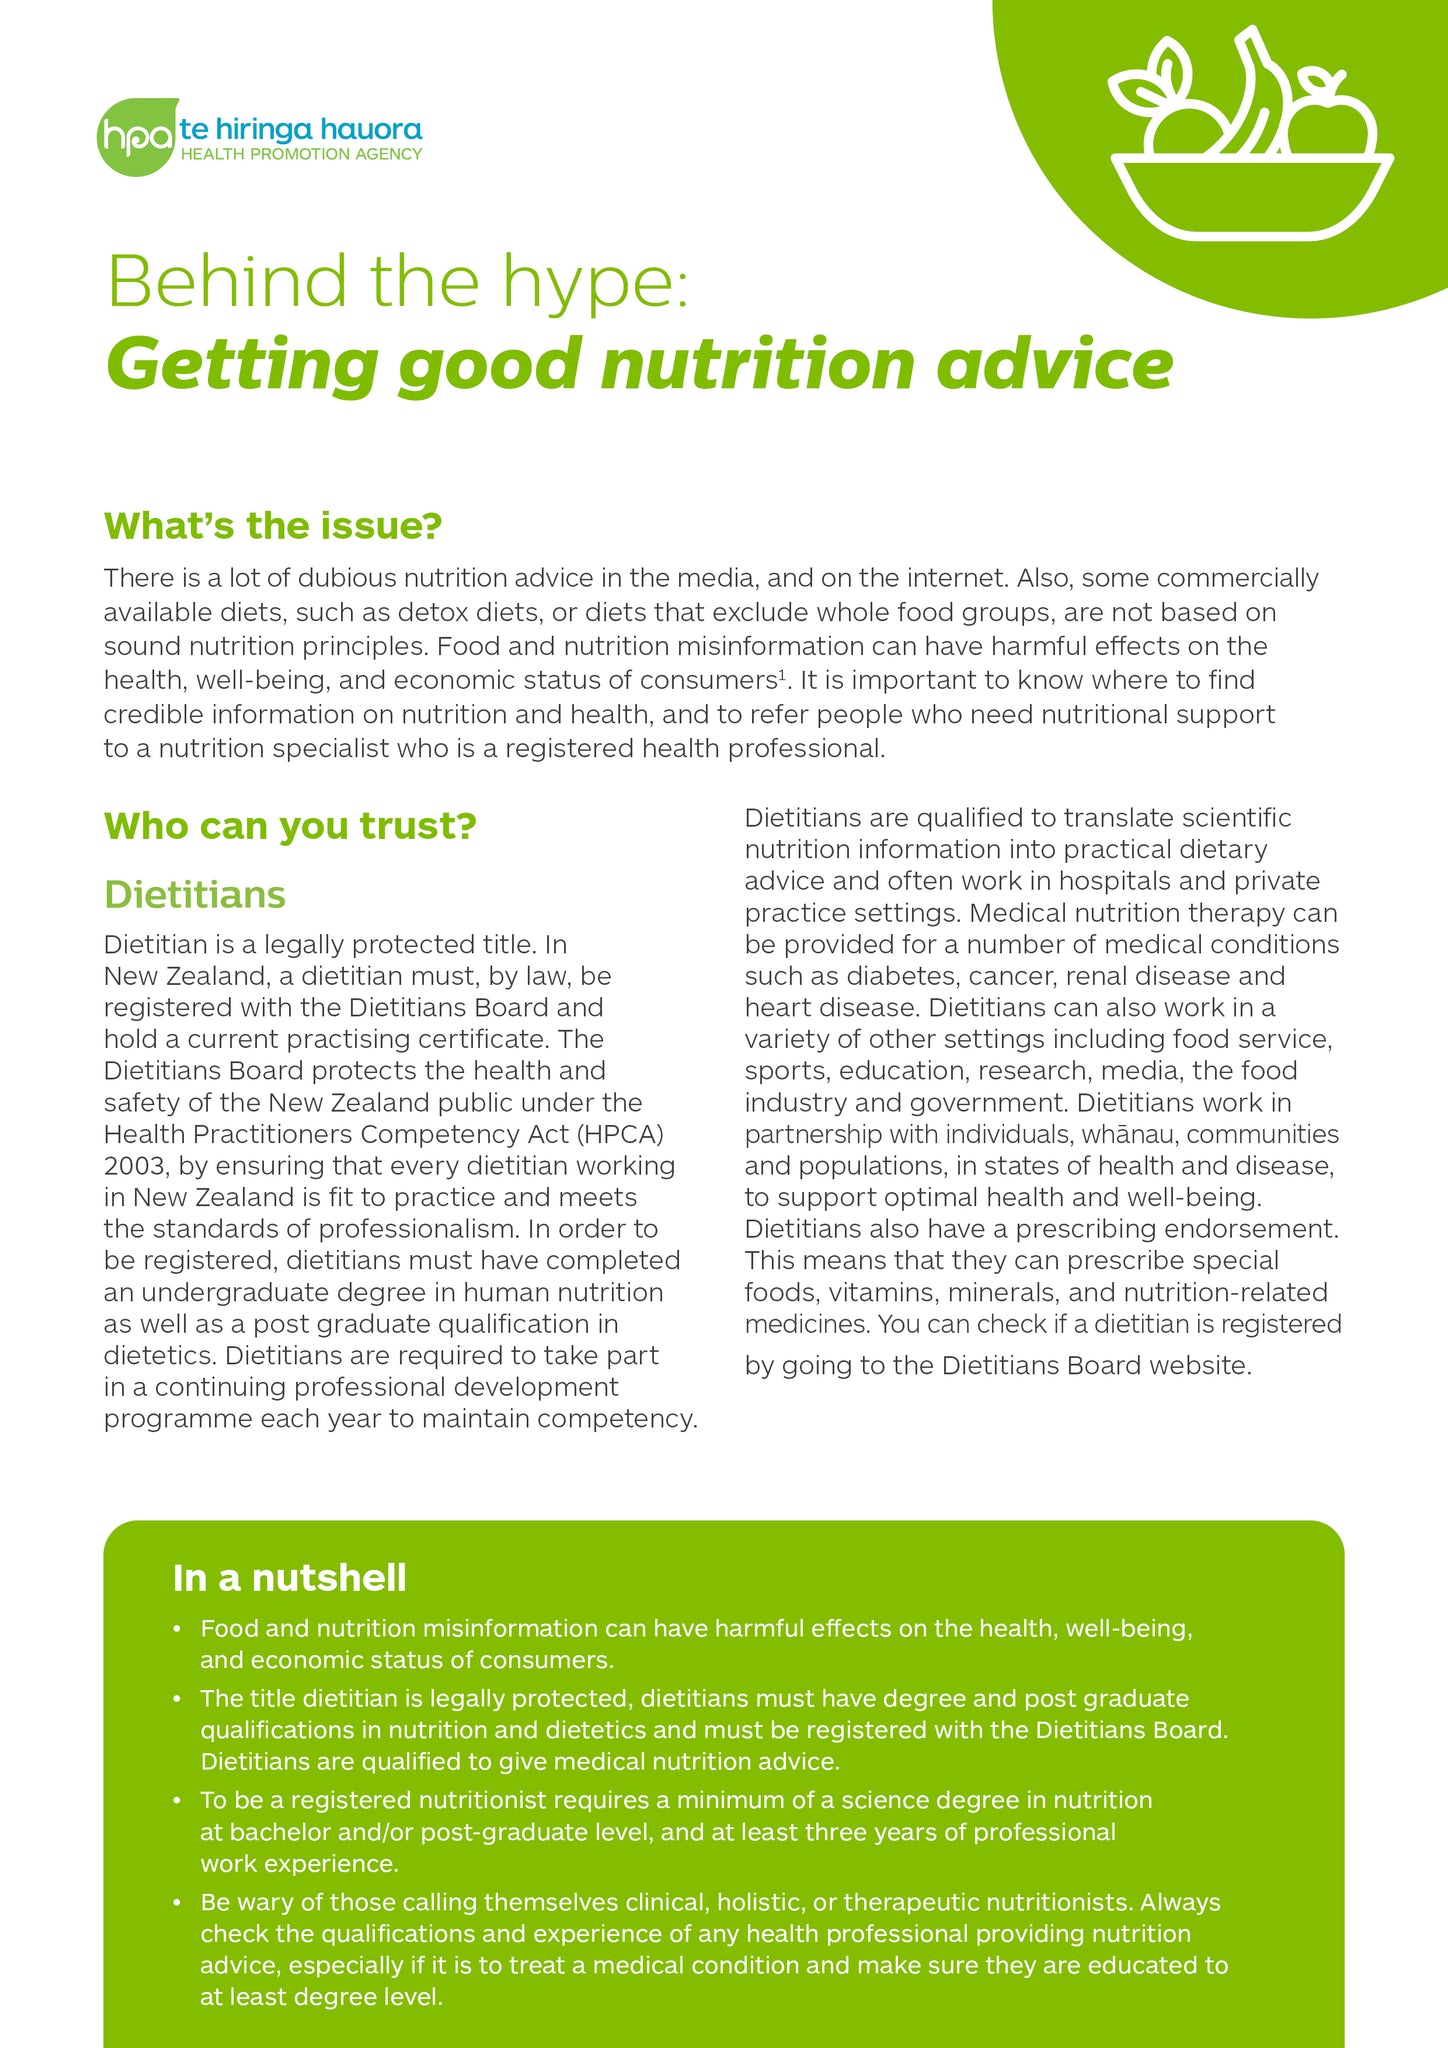 Behind the hype: Getting good nutrition advice - Digital only